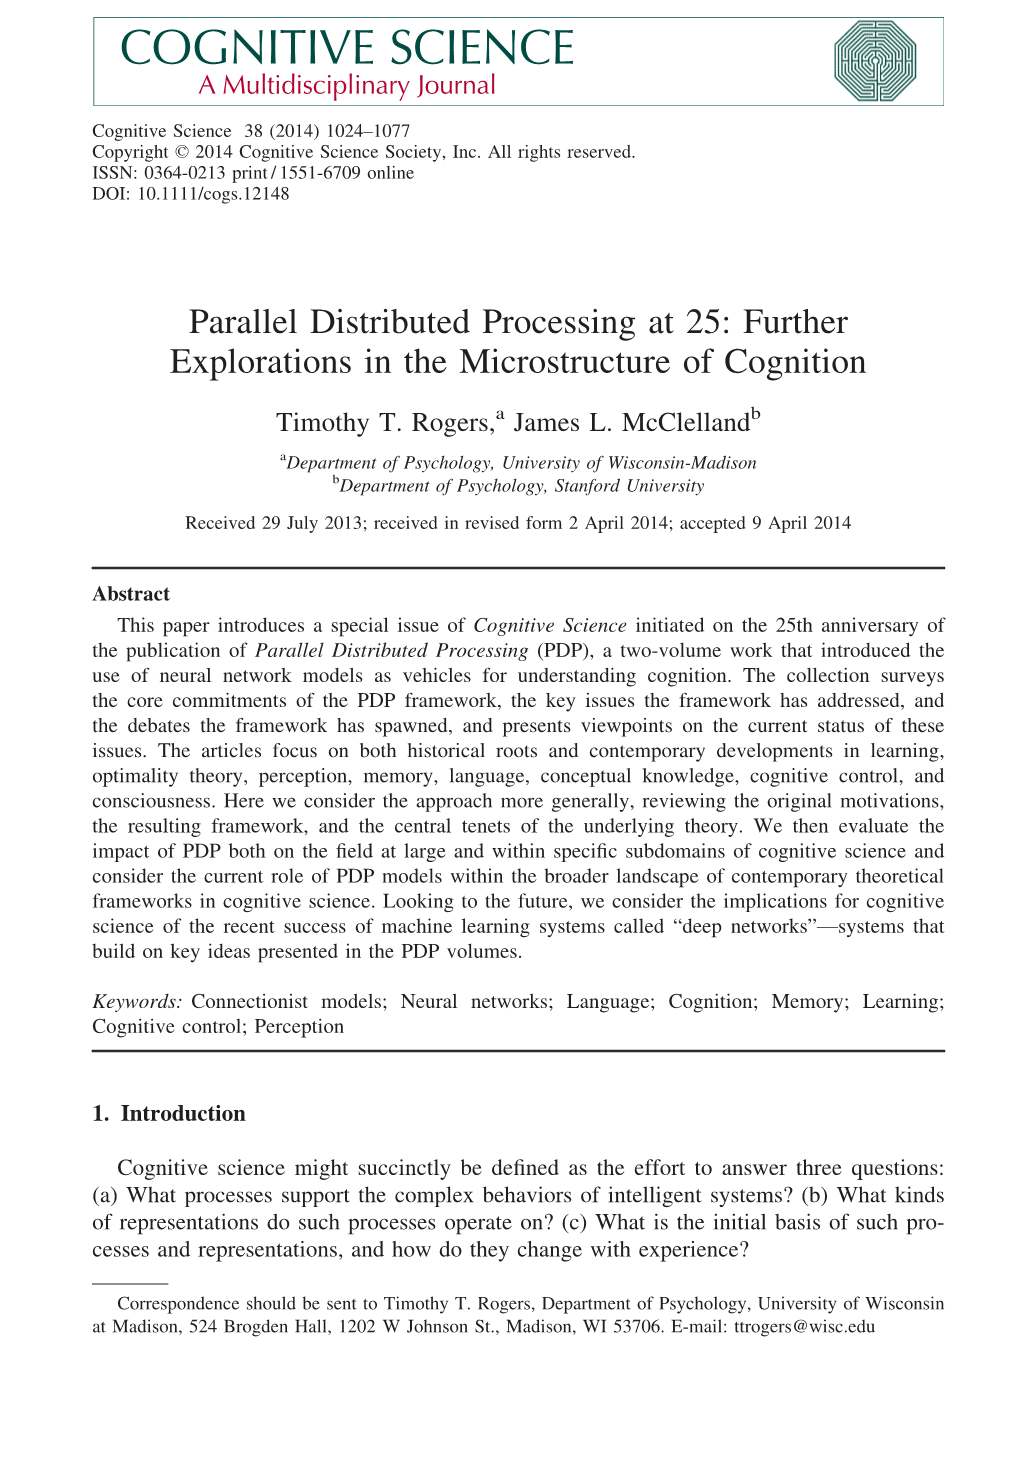 Parallel Distributed Processing at 25: Further Explorations in the Microstructure of Cognition